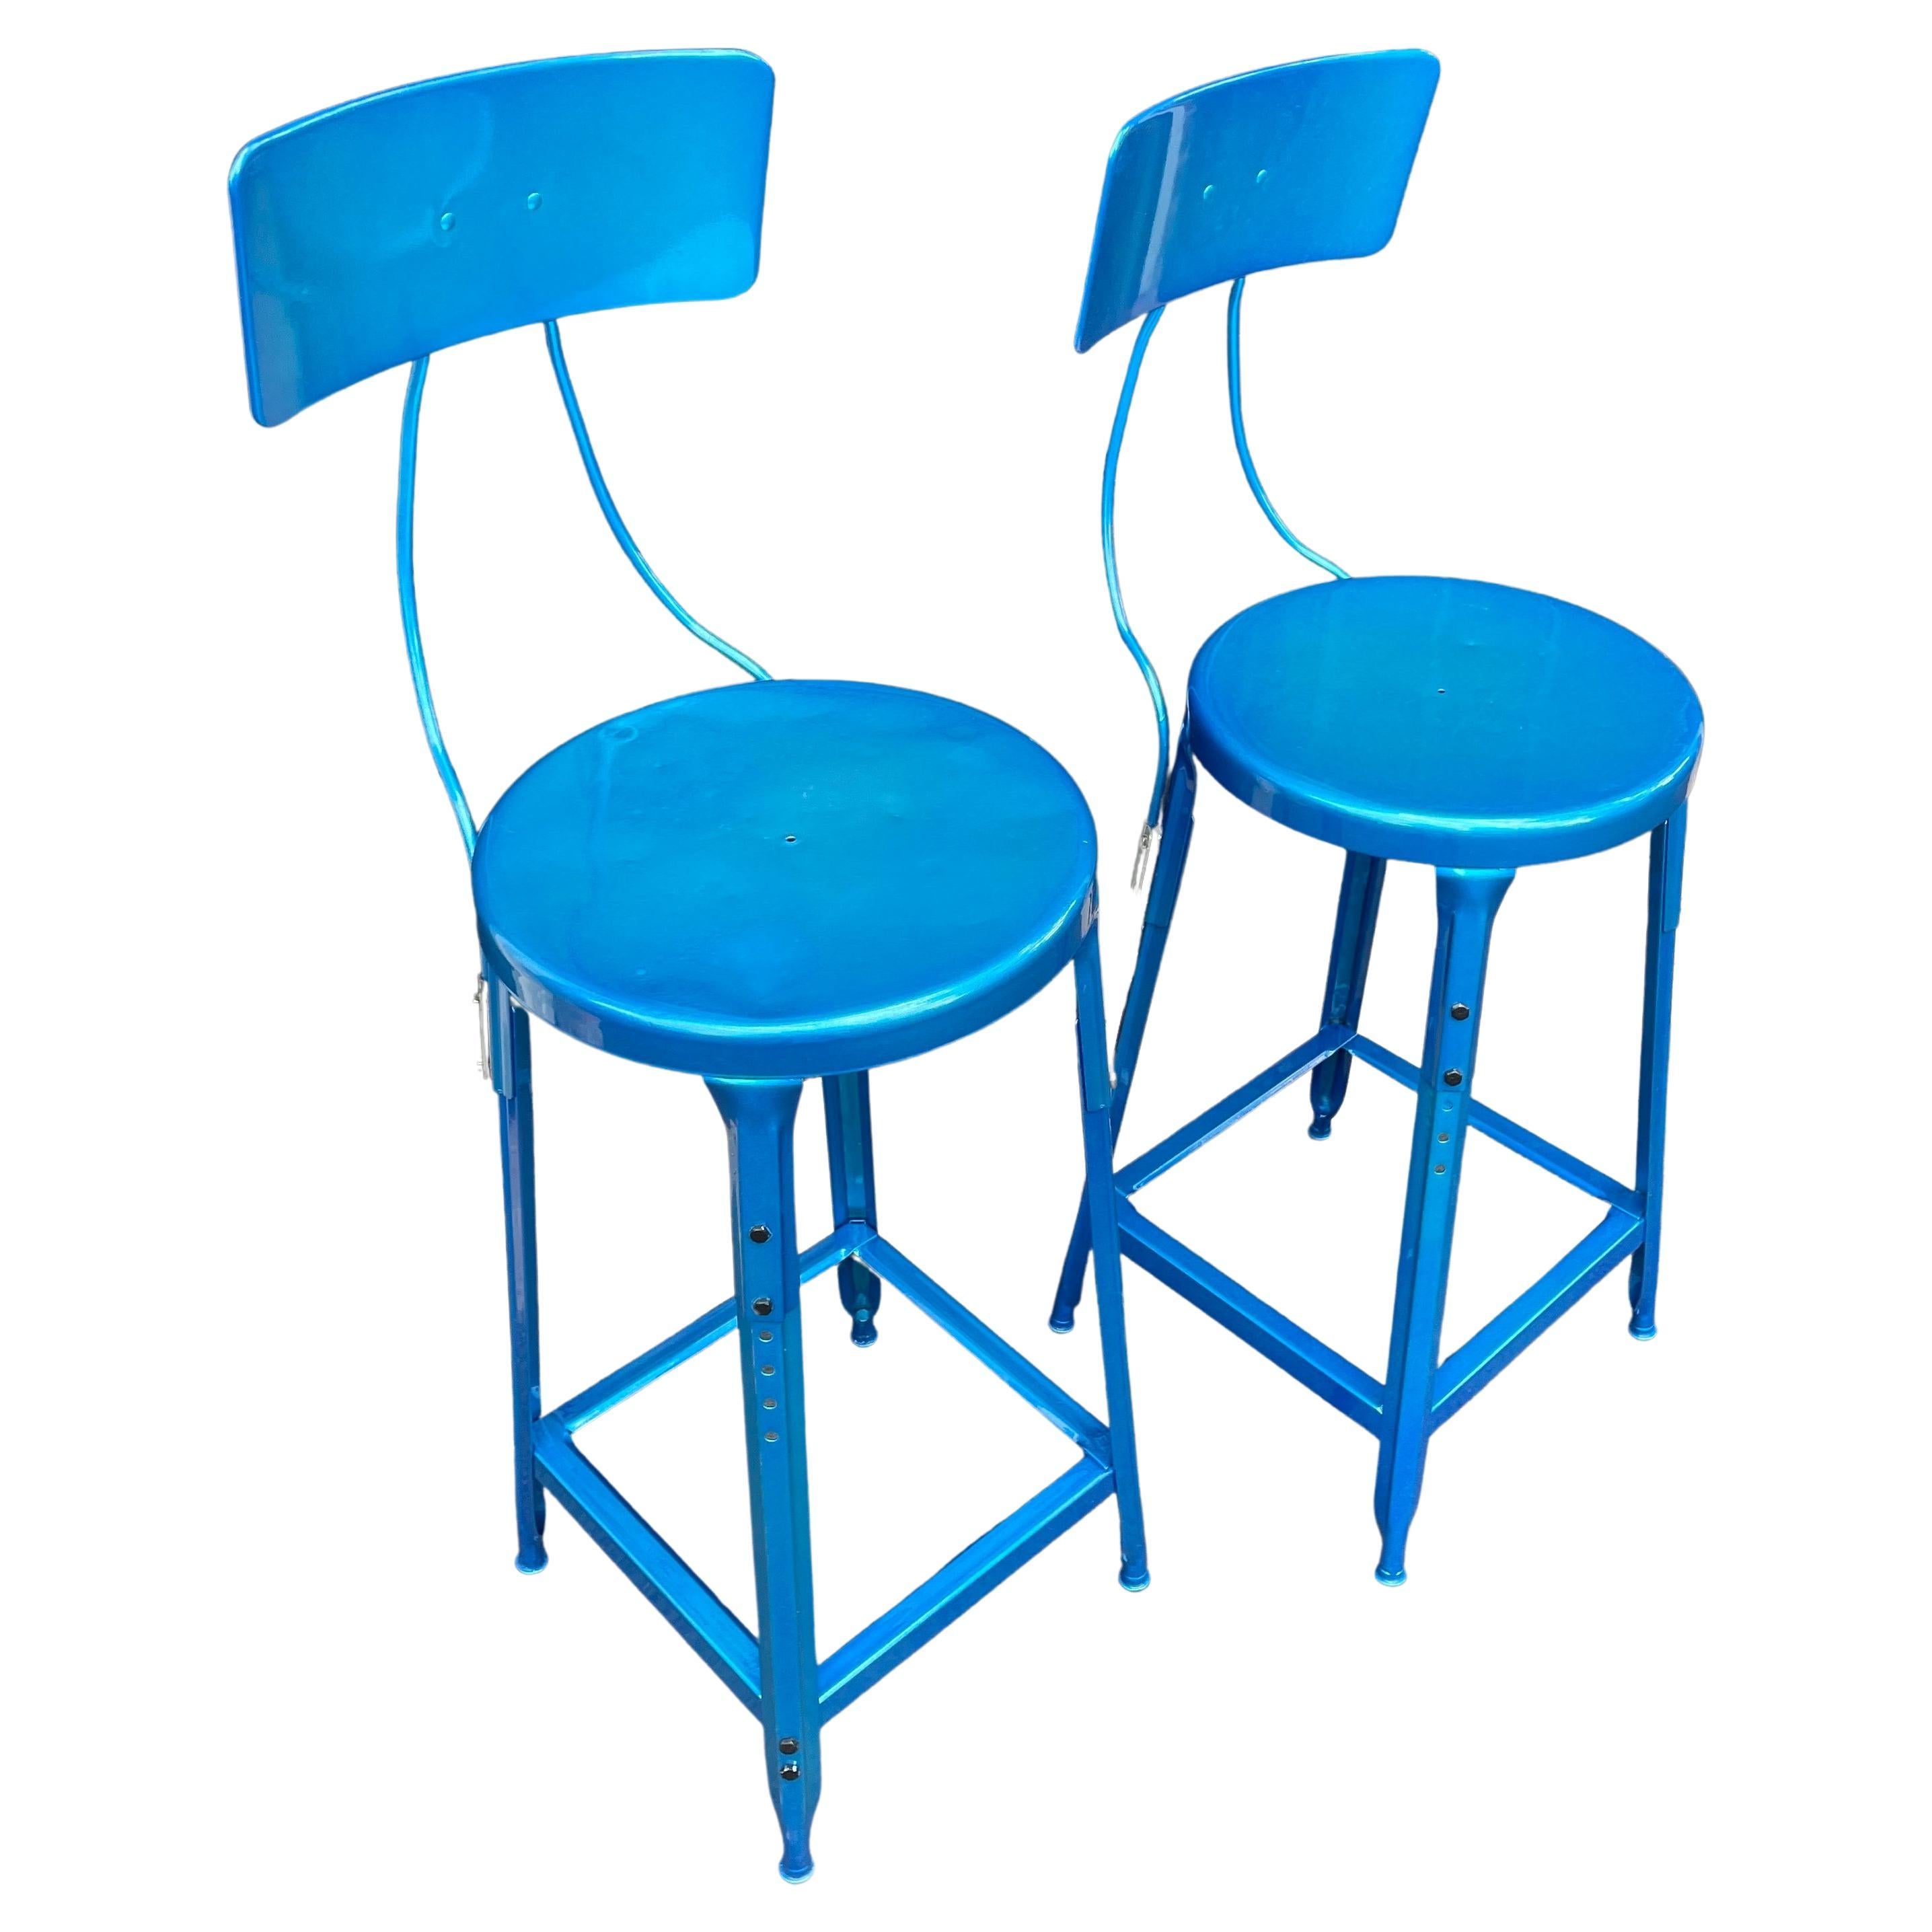 American Set of Two Heavy Industrial Bar Stools in Powder Coated Blue For Sale